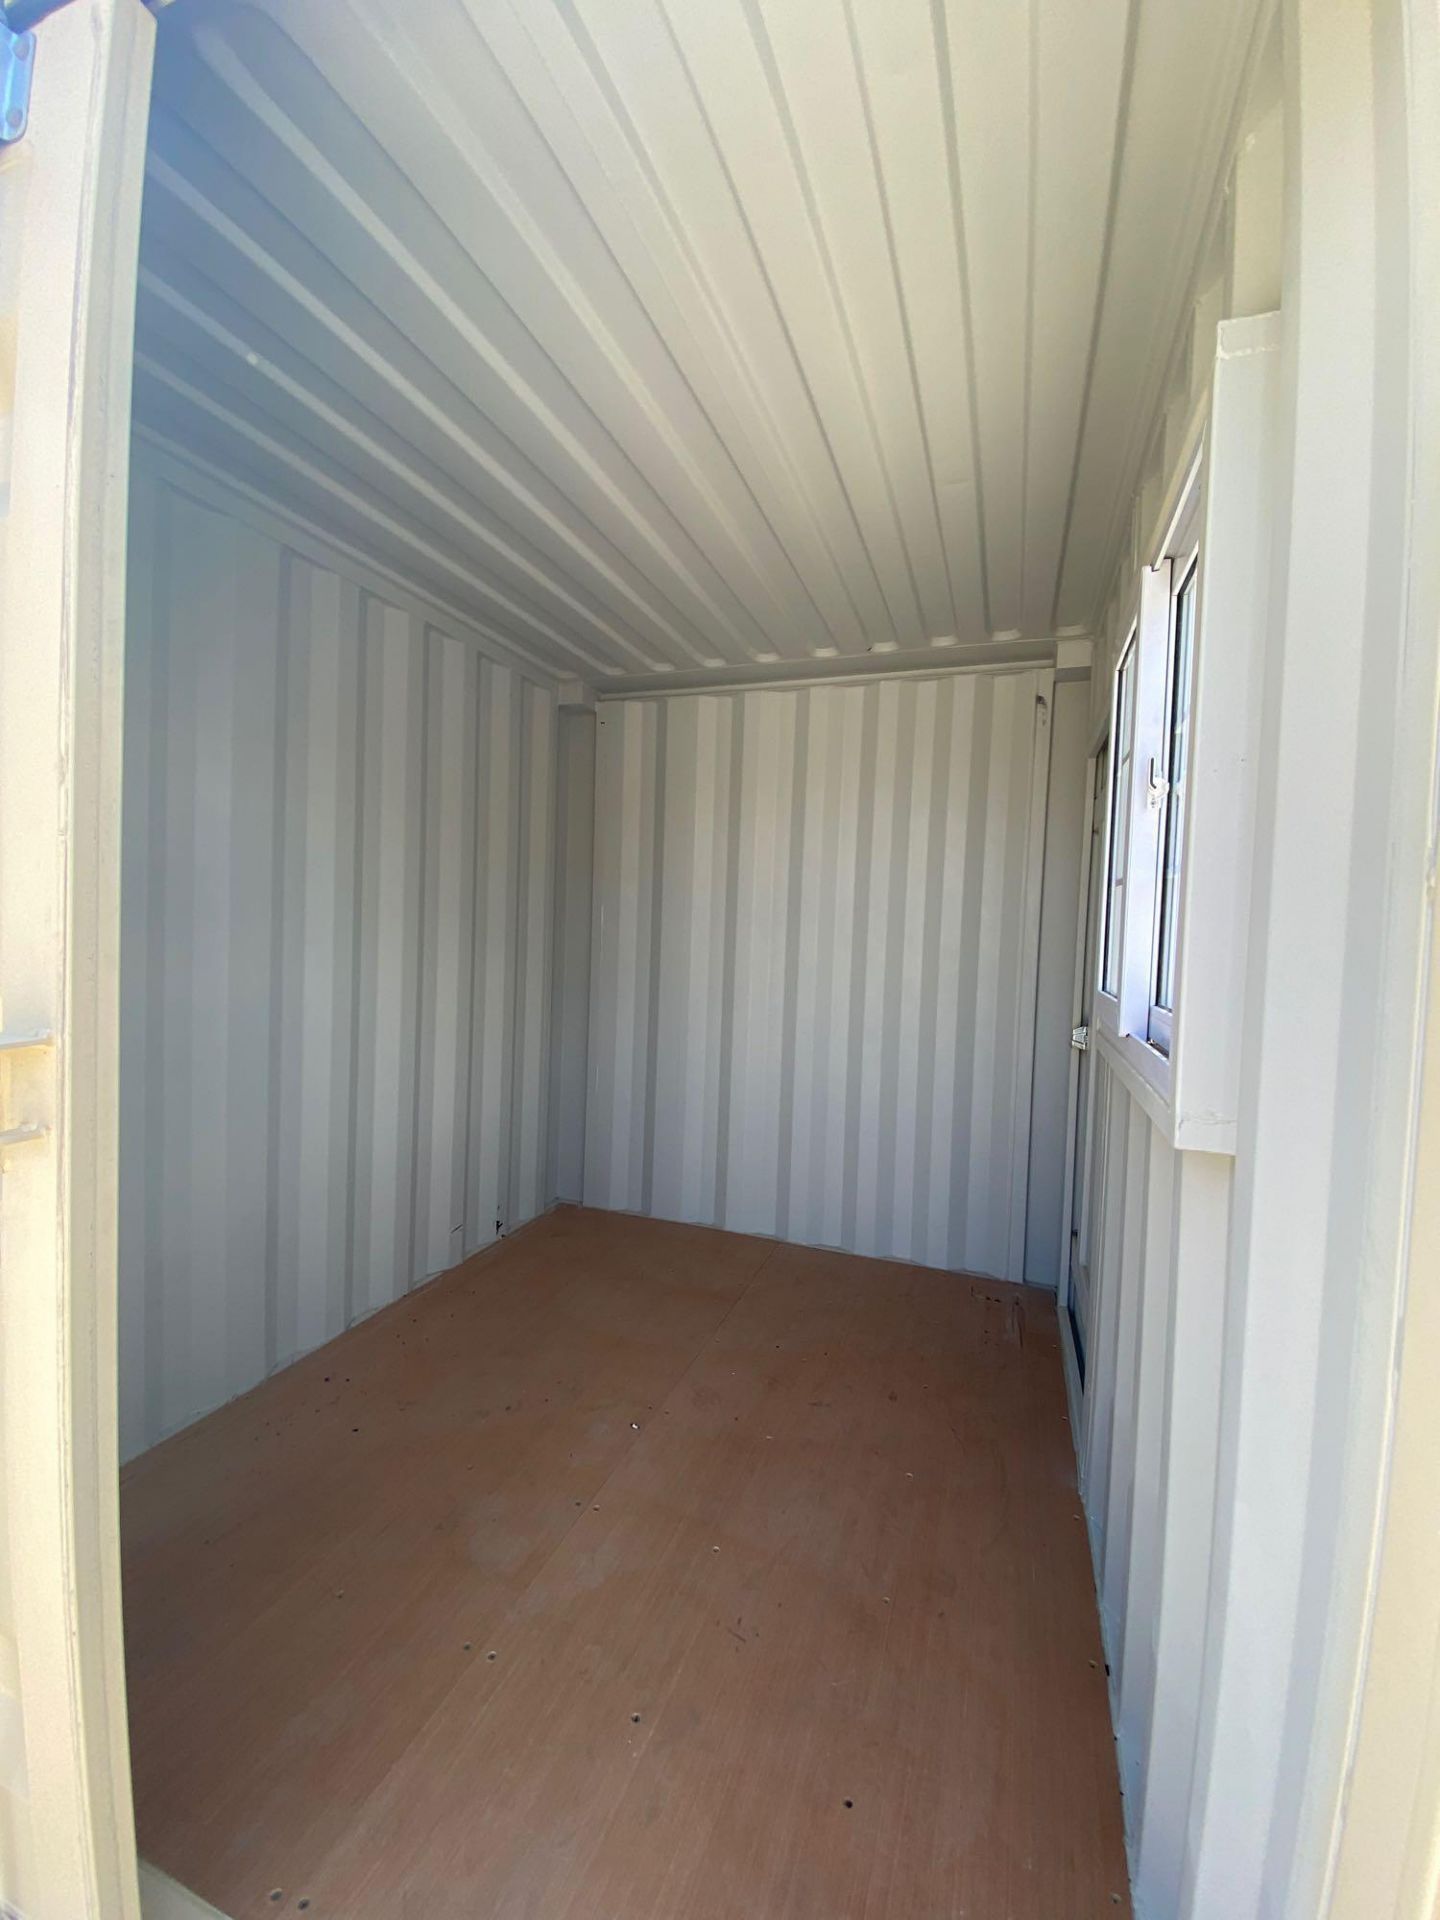 PORTABLE STORAGE CONTAINER/PORTABLE OFFICE, 6 1/2 x 9' x 8'T - Image 7 of 7